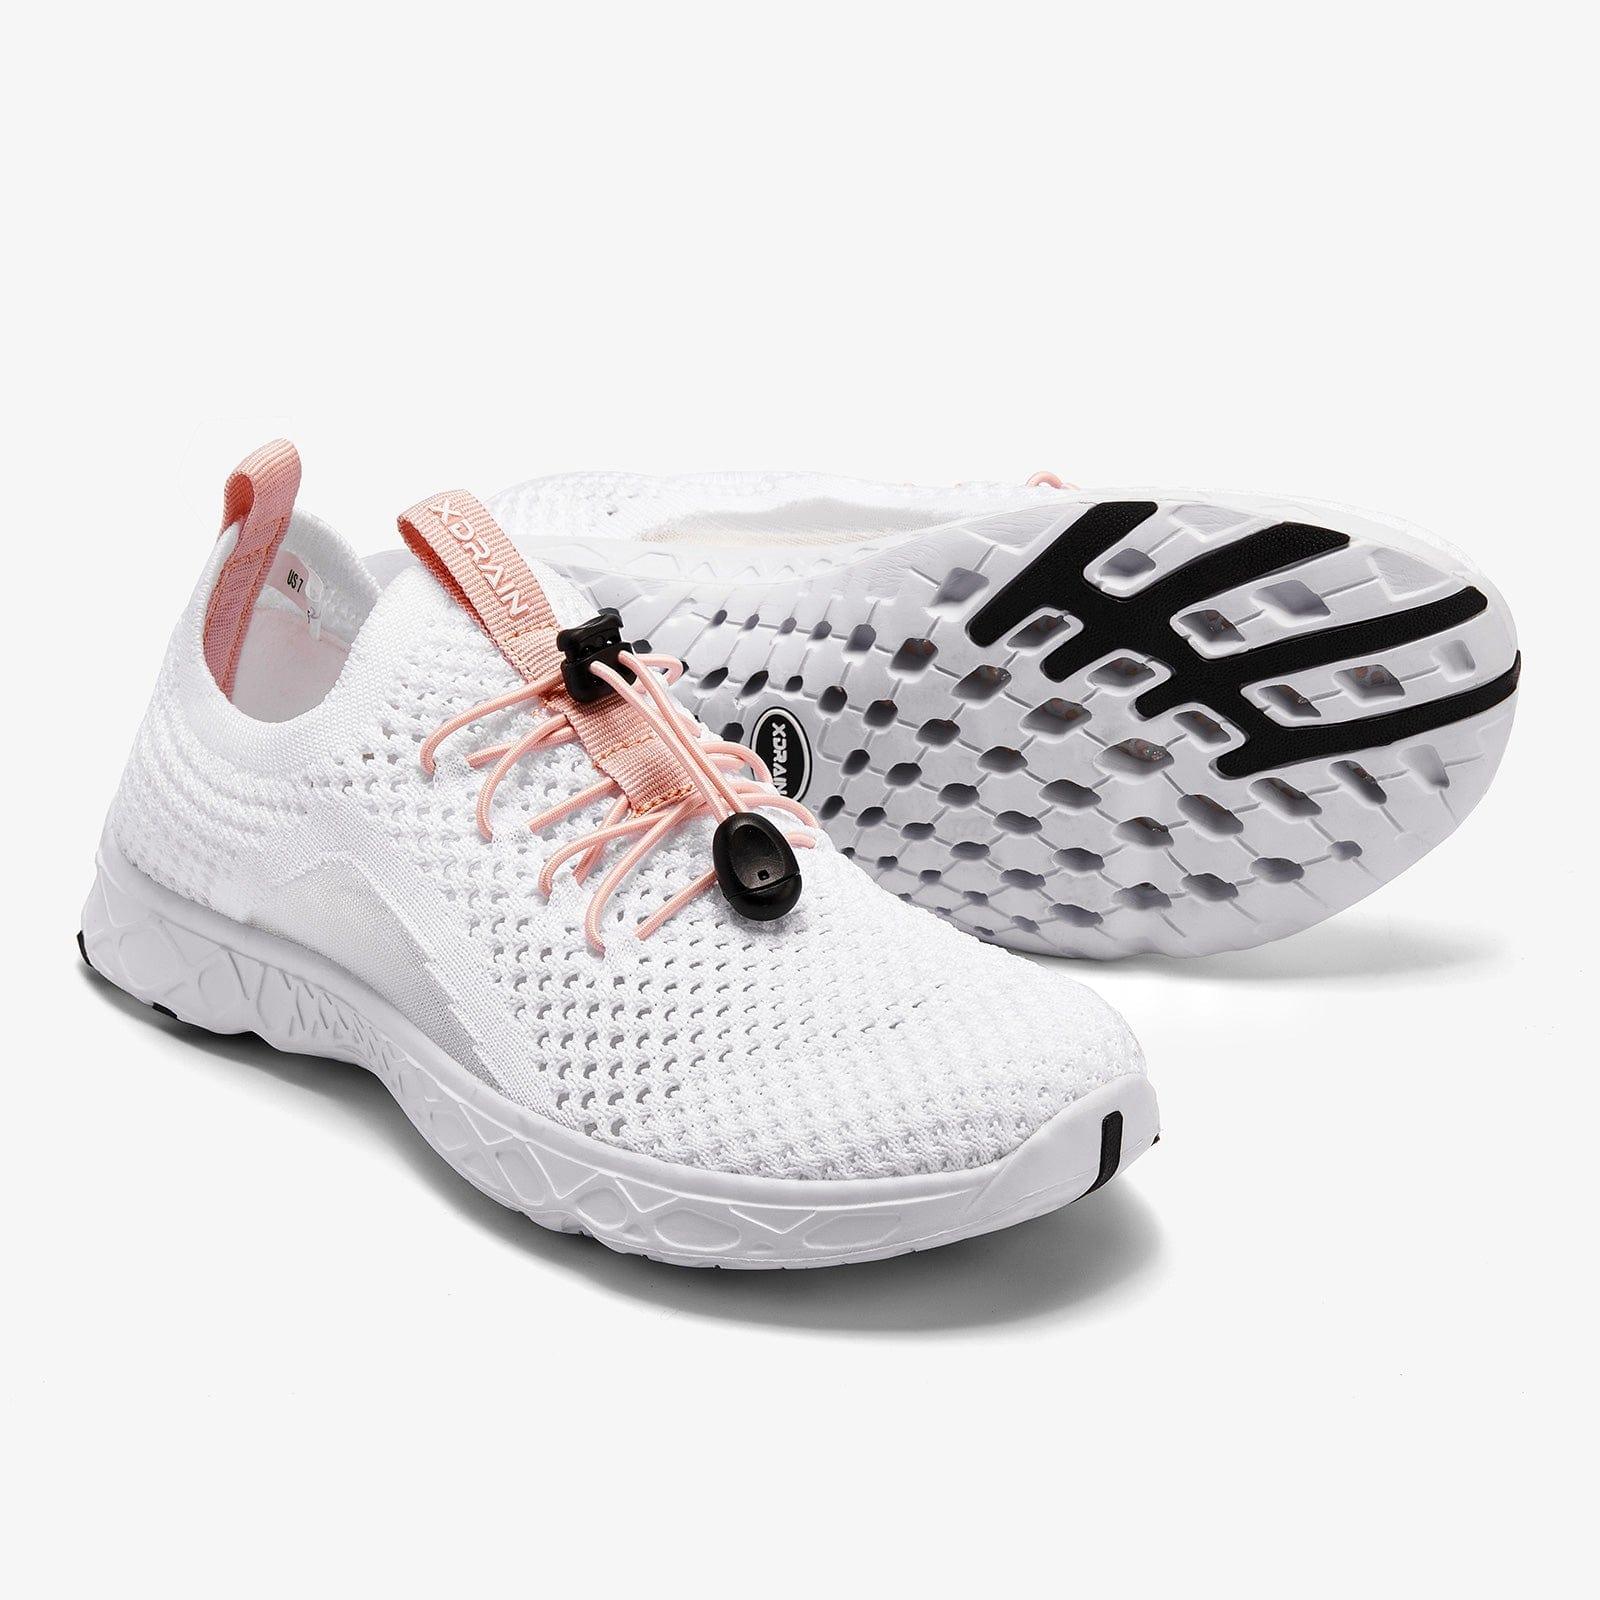 Aleader 6 / White/Pink-XD Aleader Women's Xdrain Vibe Knit Water Shoes